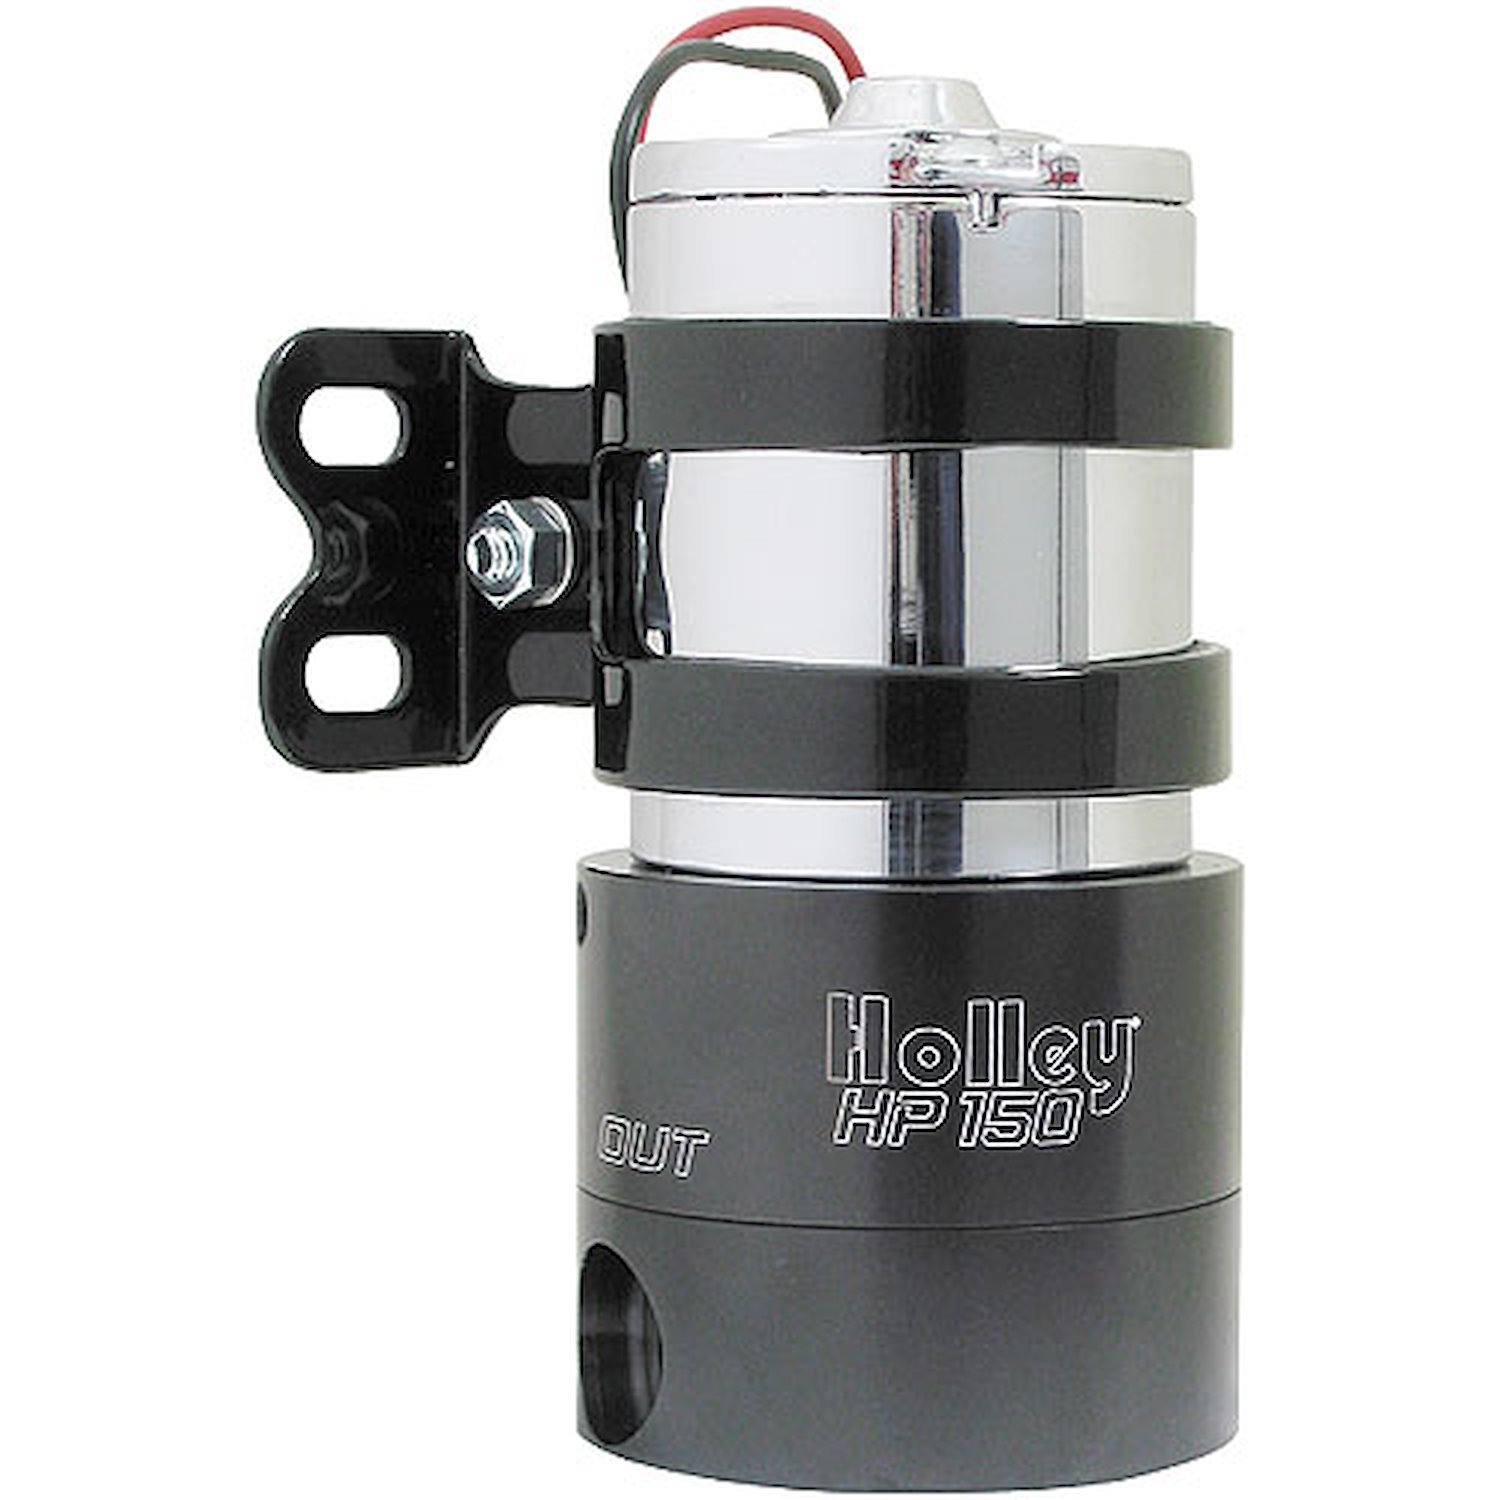 12-150 HP 150 Electric Fuel Pump 140 GPH @ 7 psi Internally regulated to 16 psi Up to 900HP Includes 4-7 psi Regulator